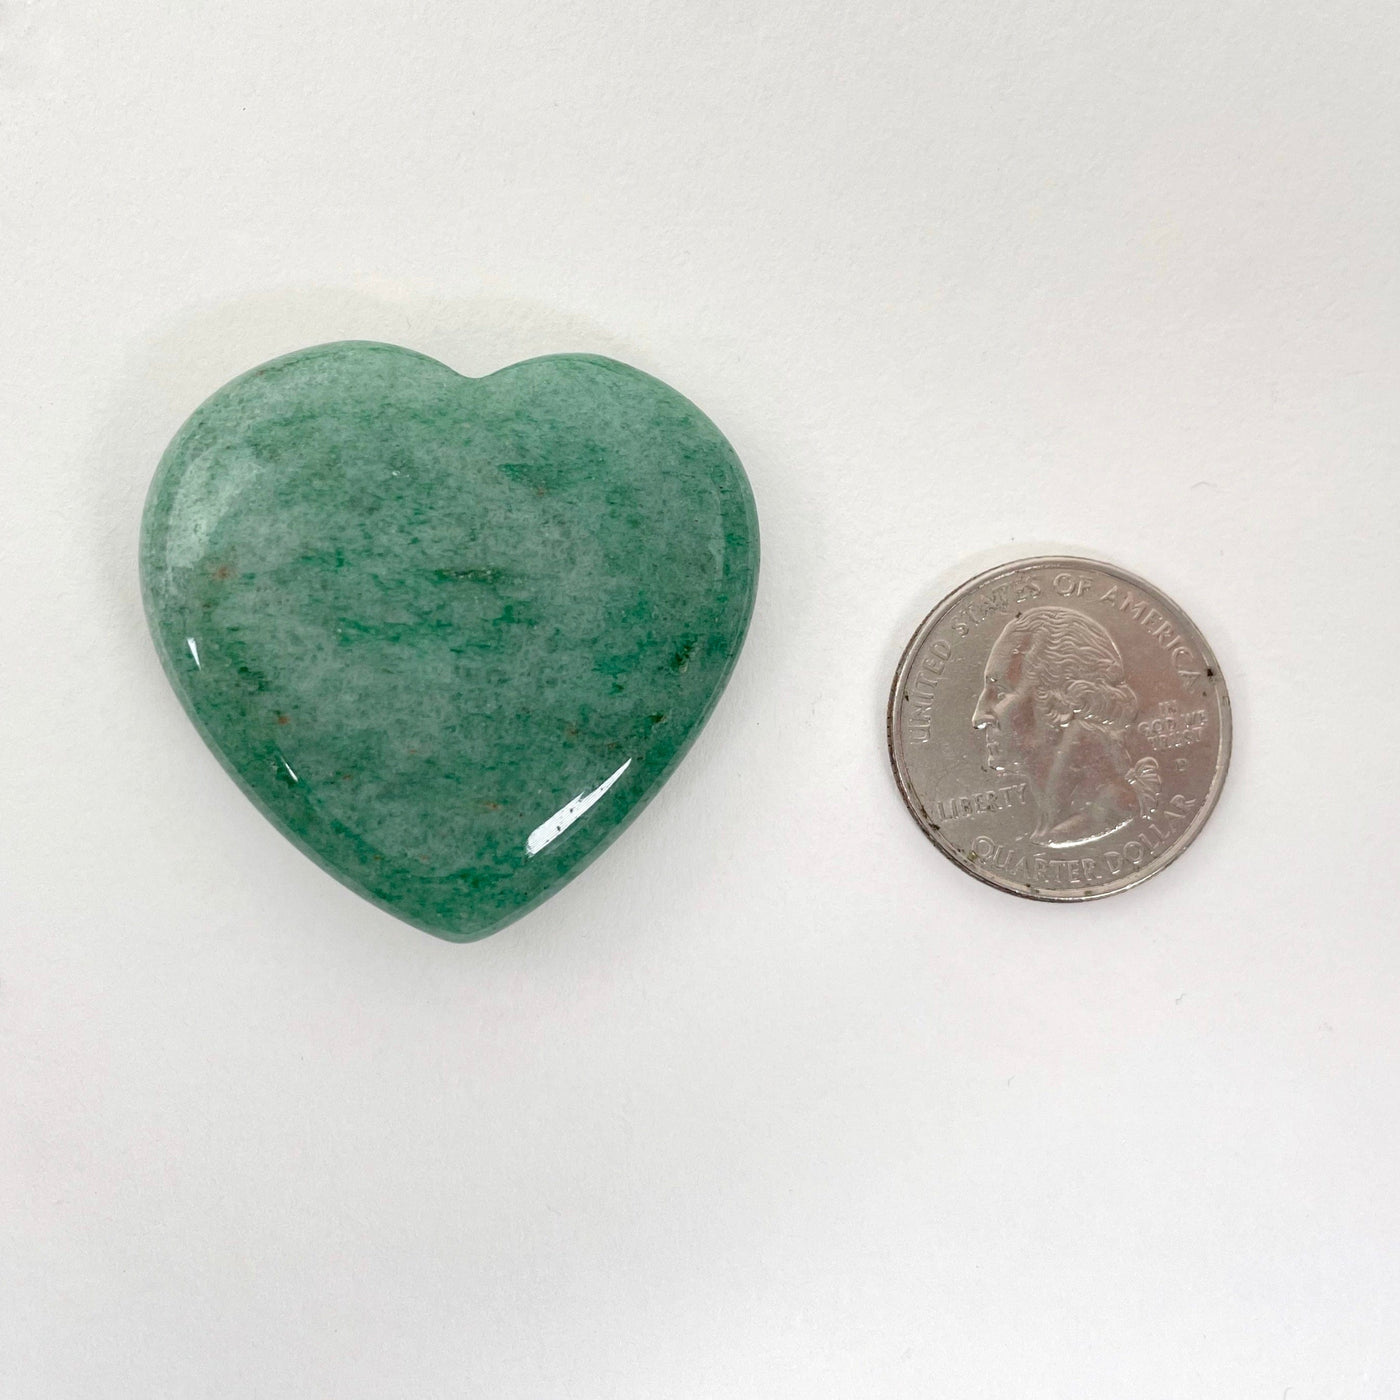 close up of green aventurine polished heart with quarter for size reference